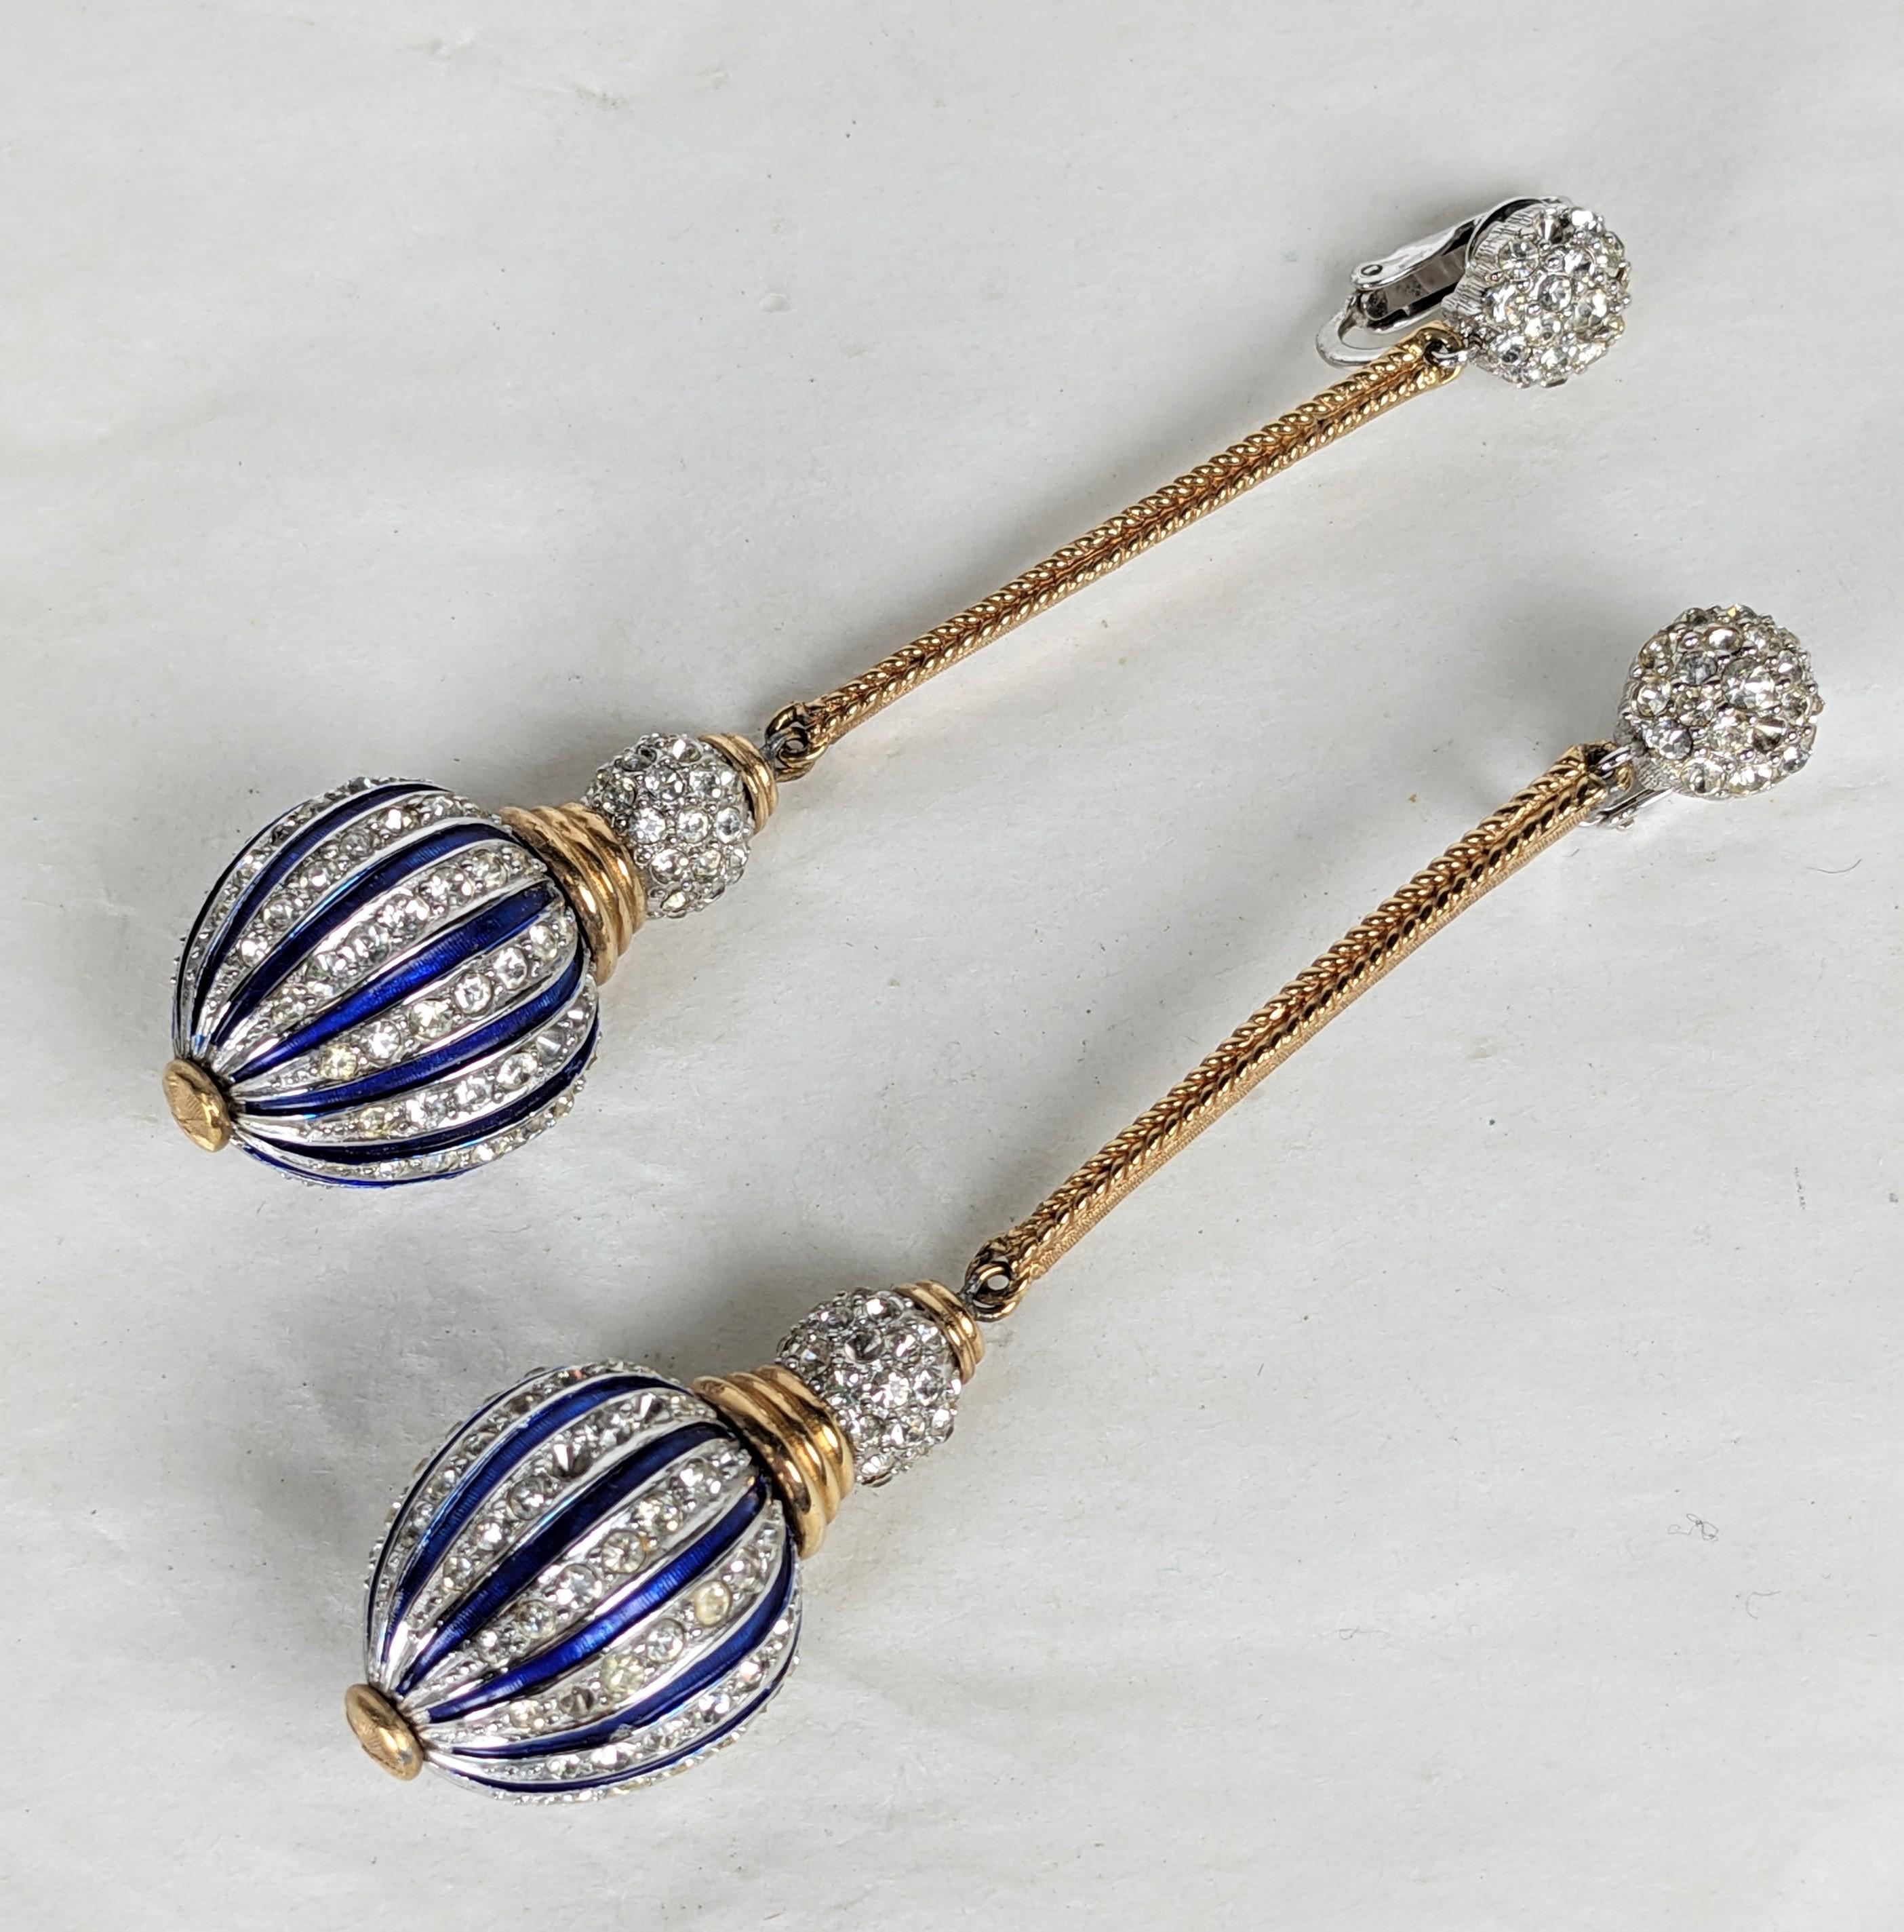 Exceptional Marcel Boucher Pave and Enamel Lantern Earrings from the 1960's. Beautiful design with clip back fittings. Collector quality. 3.5